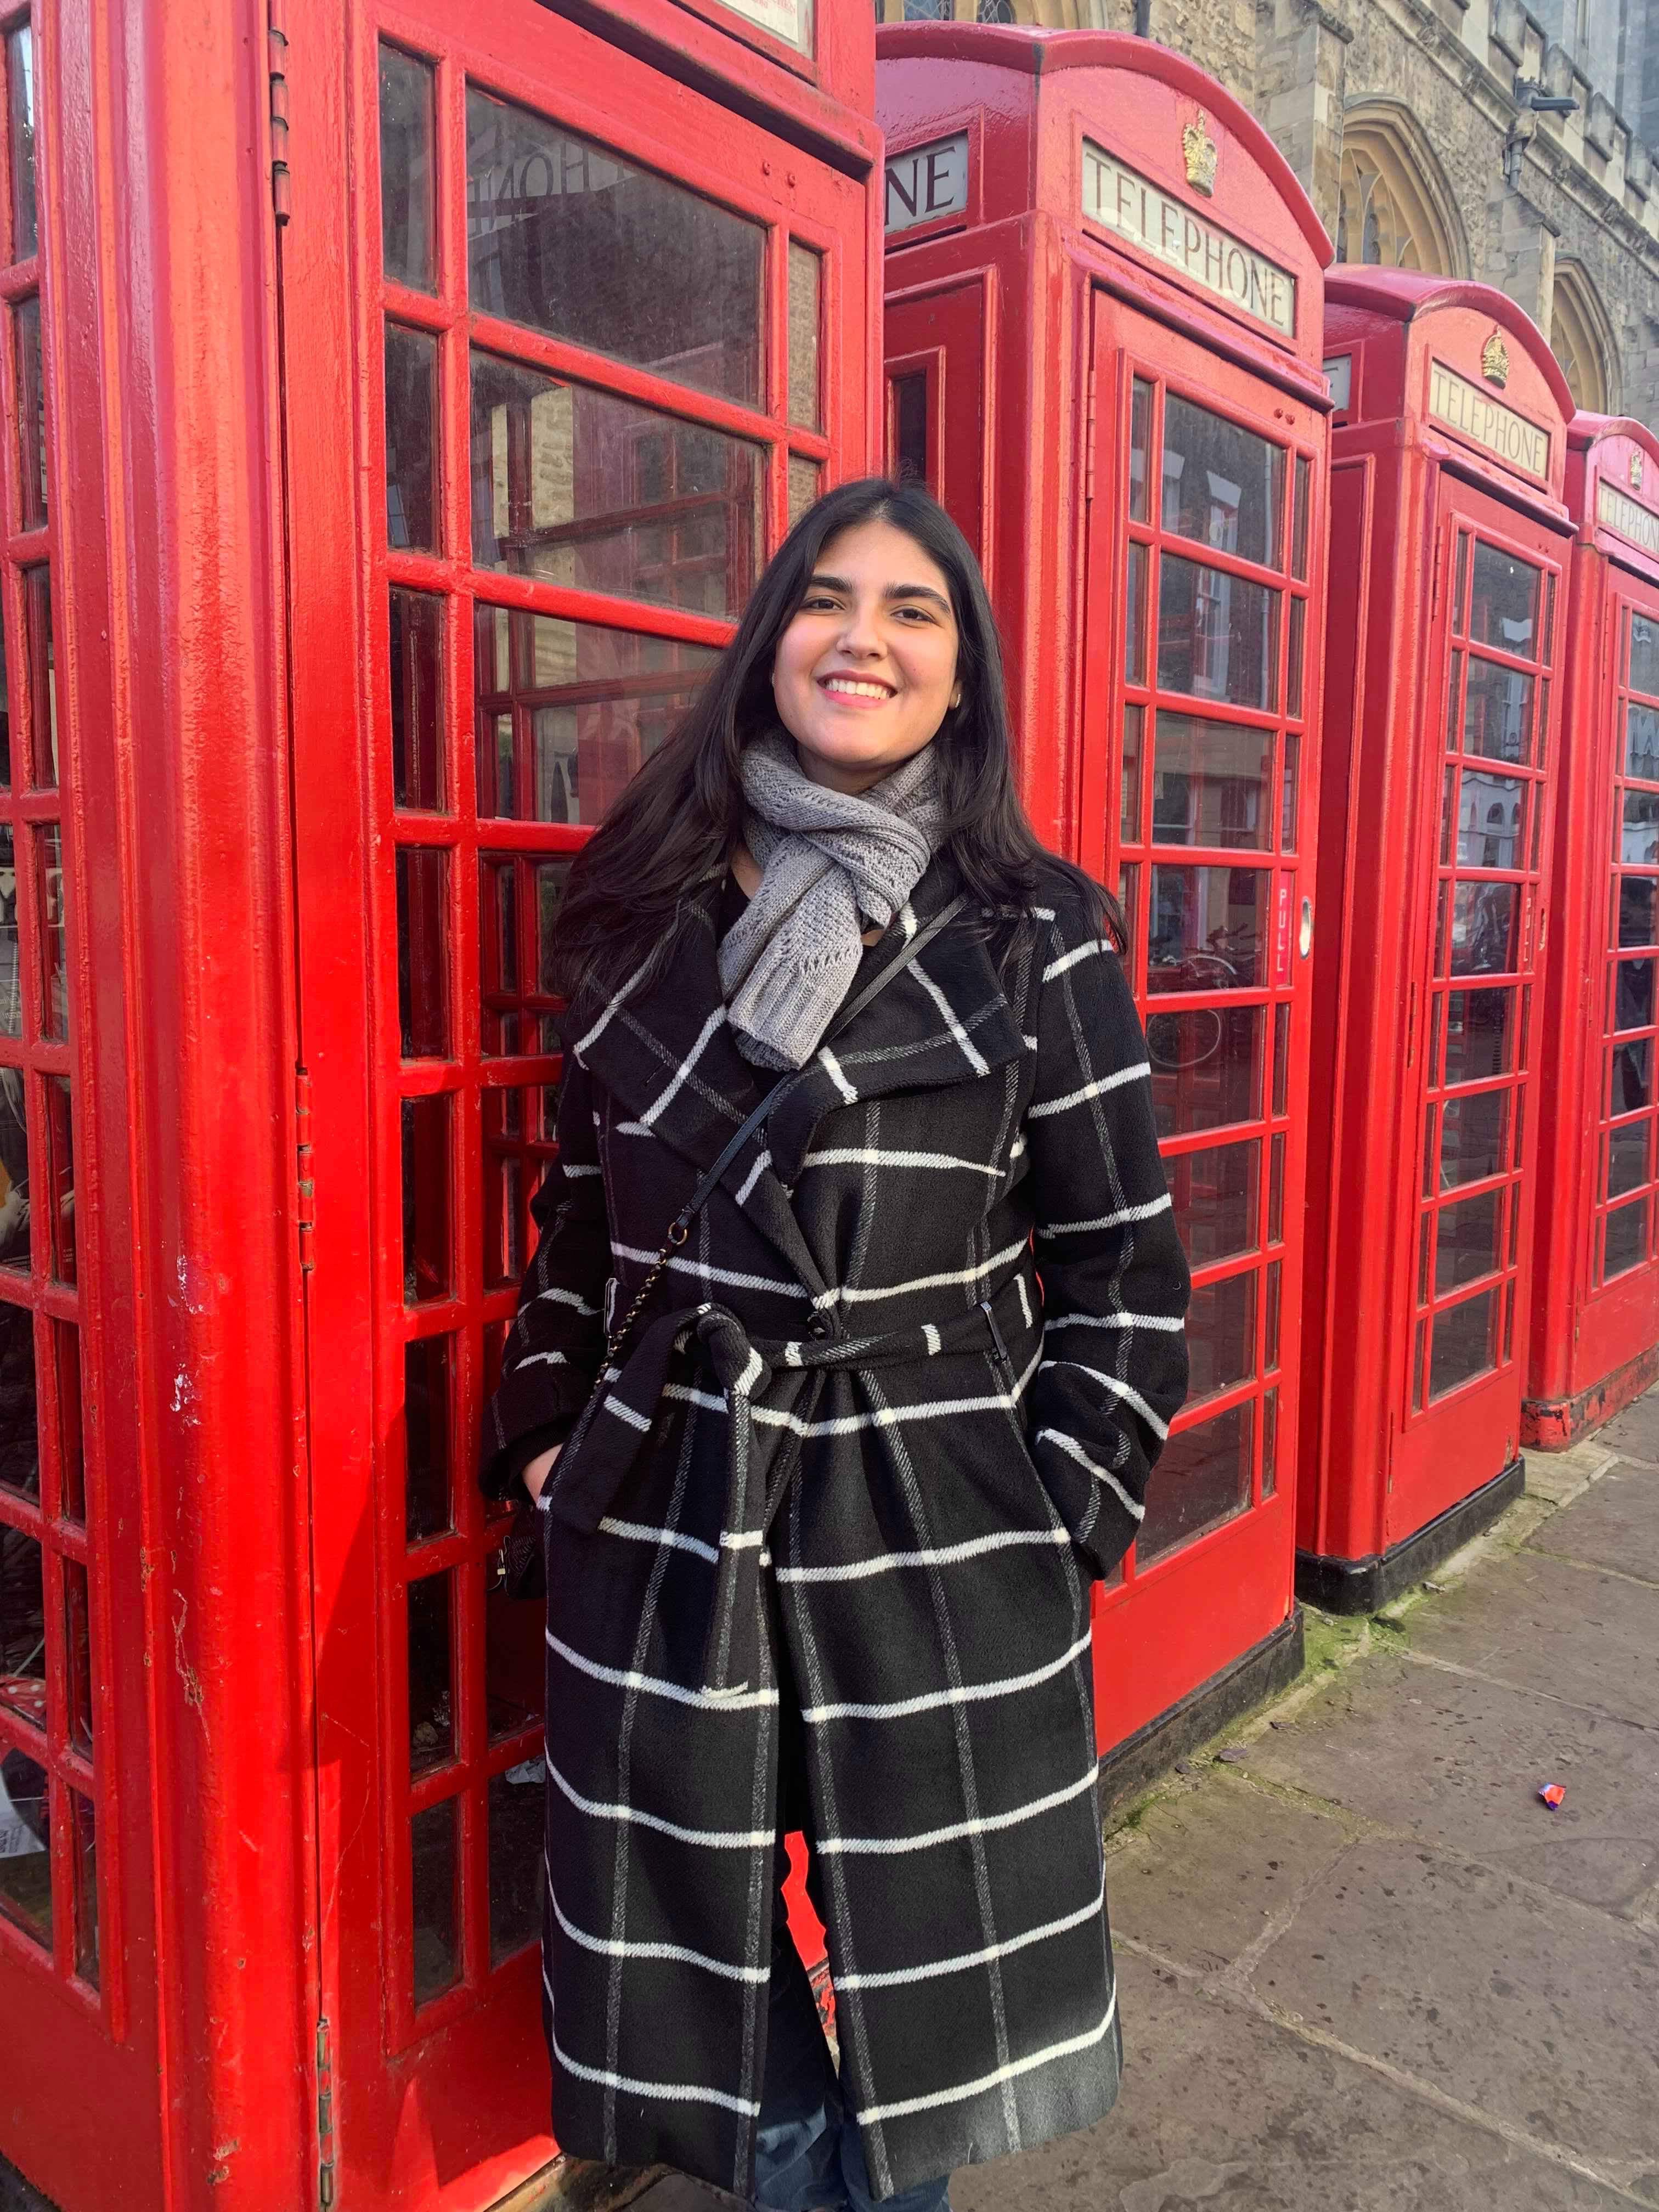 Smriti in front of a row of red phonebooths in London